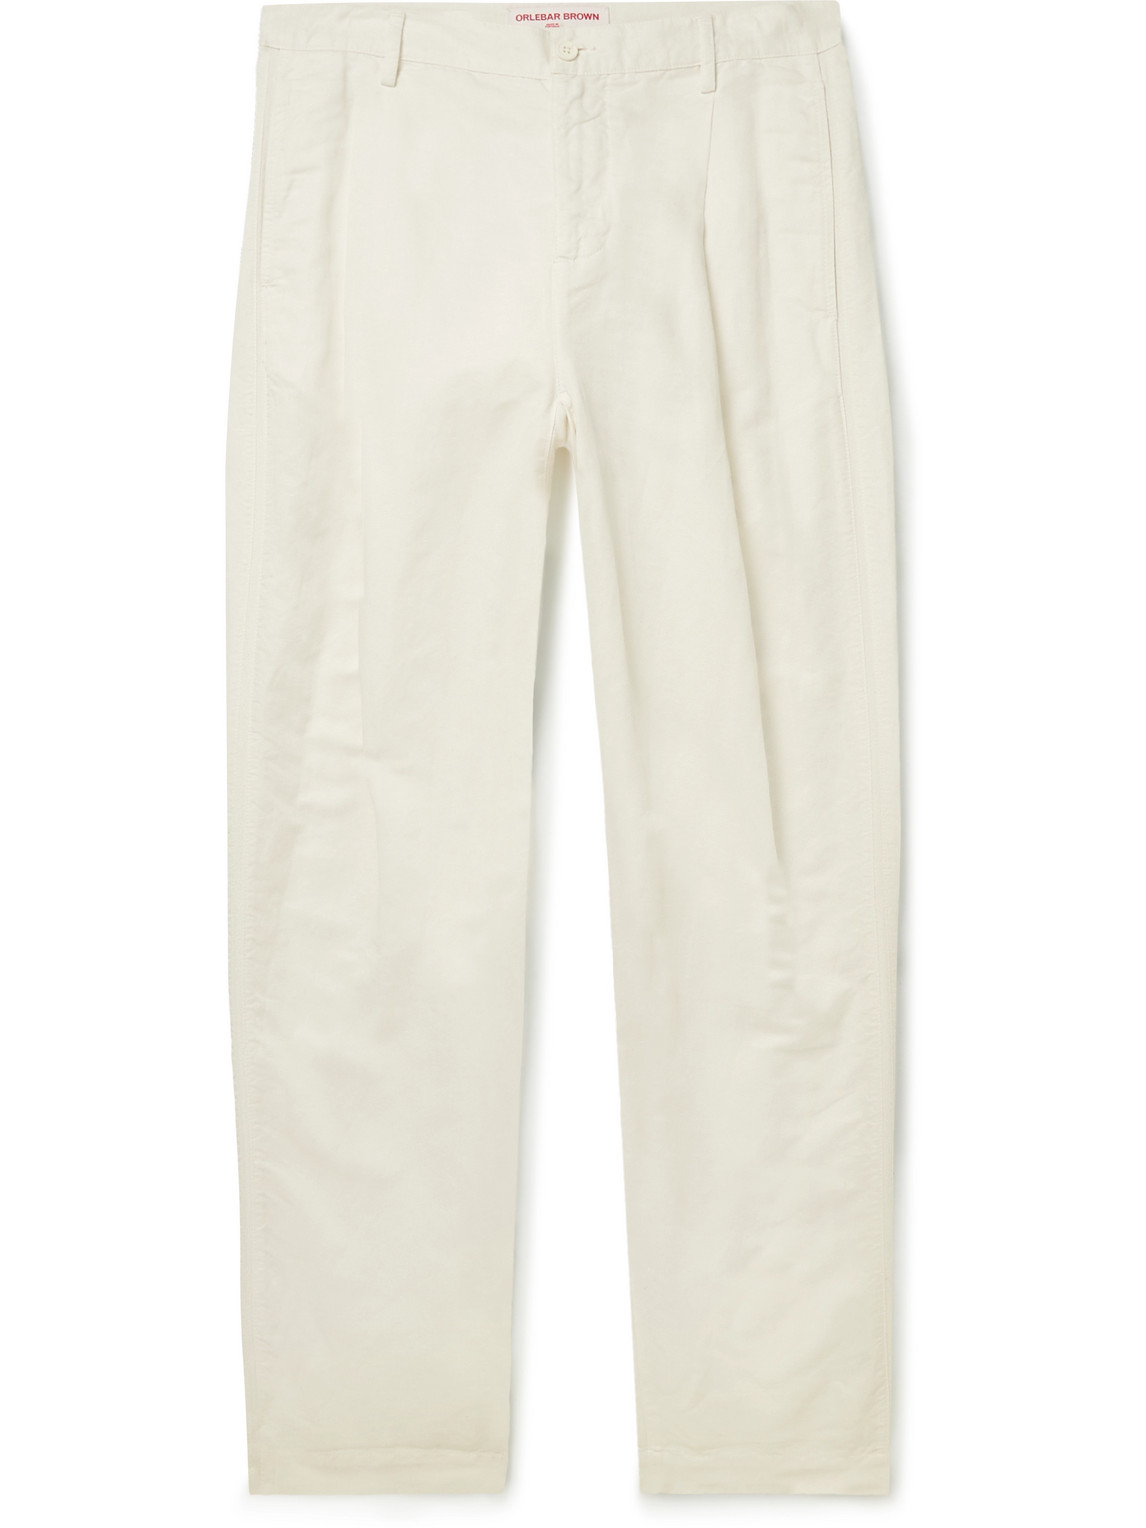 Orlebar Brown Dunmore Tapered Linen And Cotton-blend Twill Trousers In White